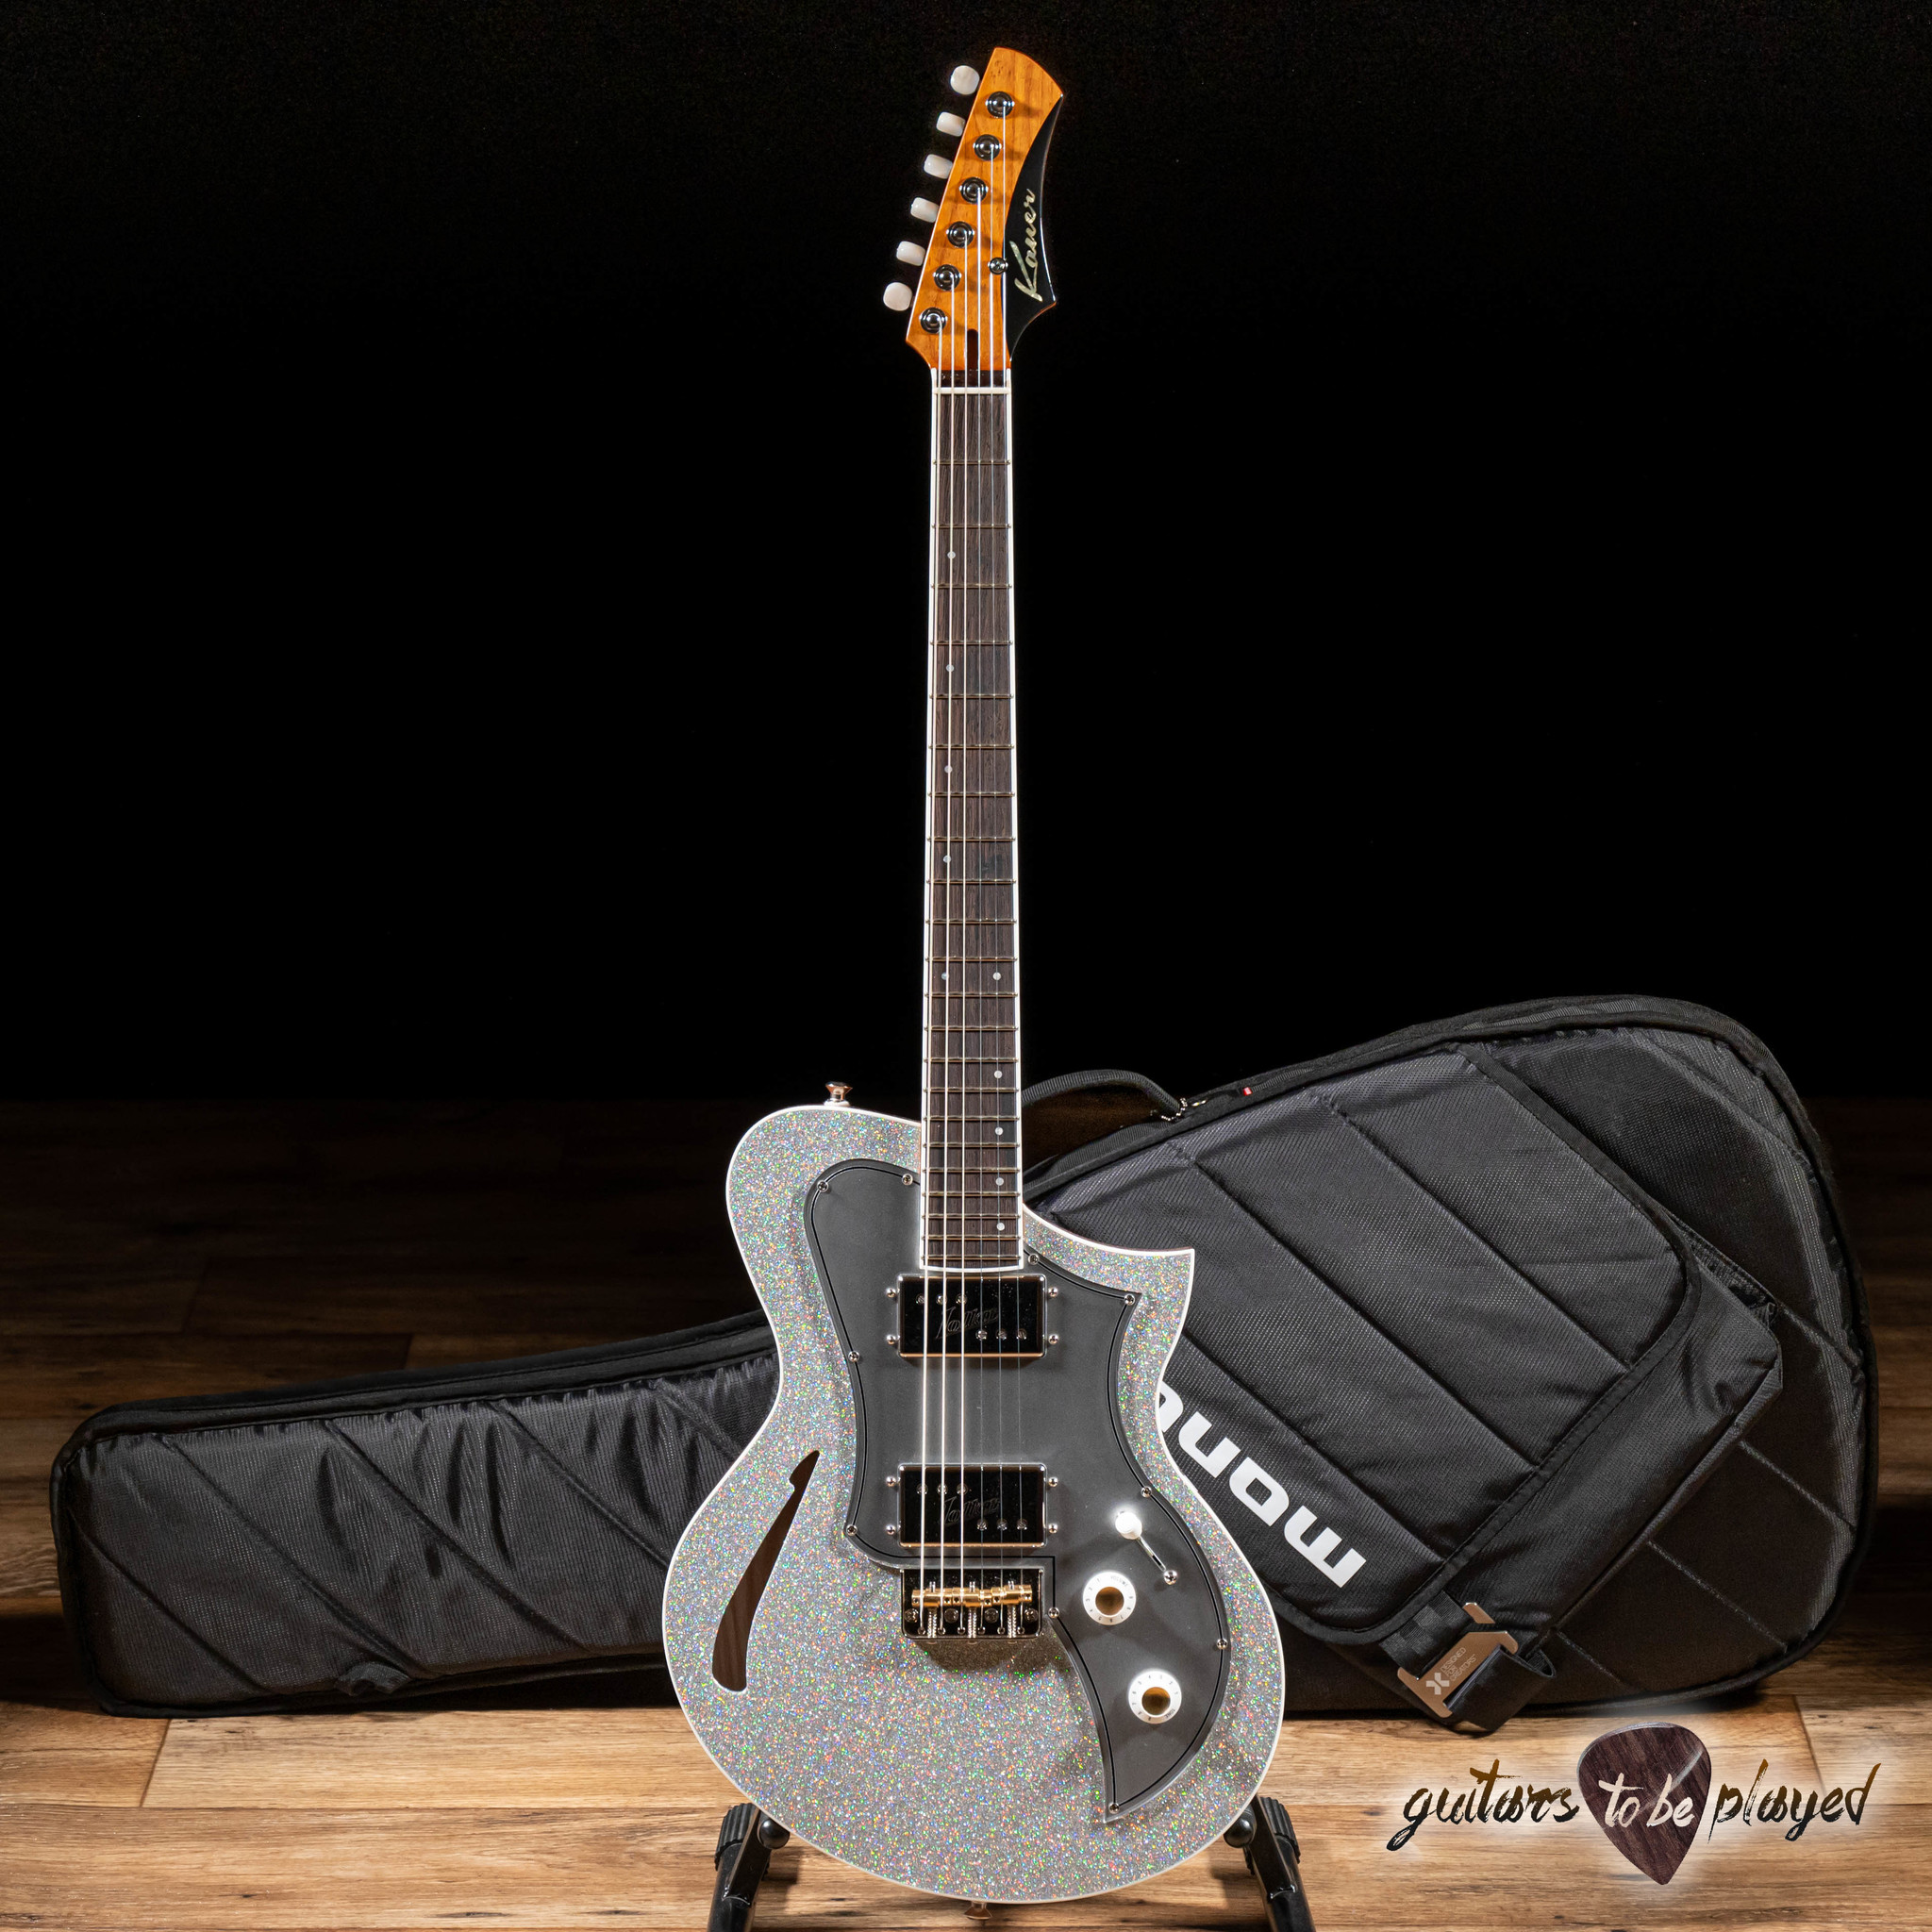 Manchuriet kalv newness Kauer Korona Supreme Thinline w/ Lollar Regals – Rainbow Trout Silver -  Guitars To Be Played